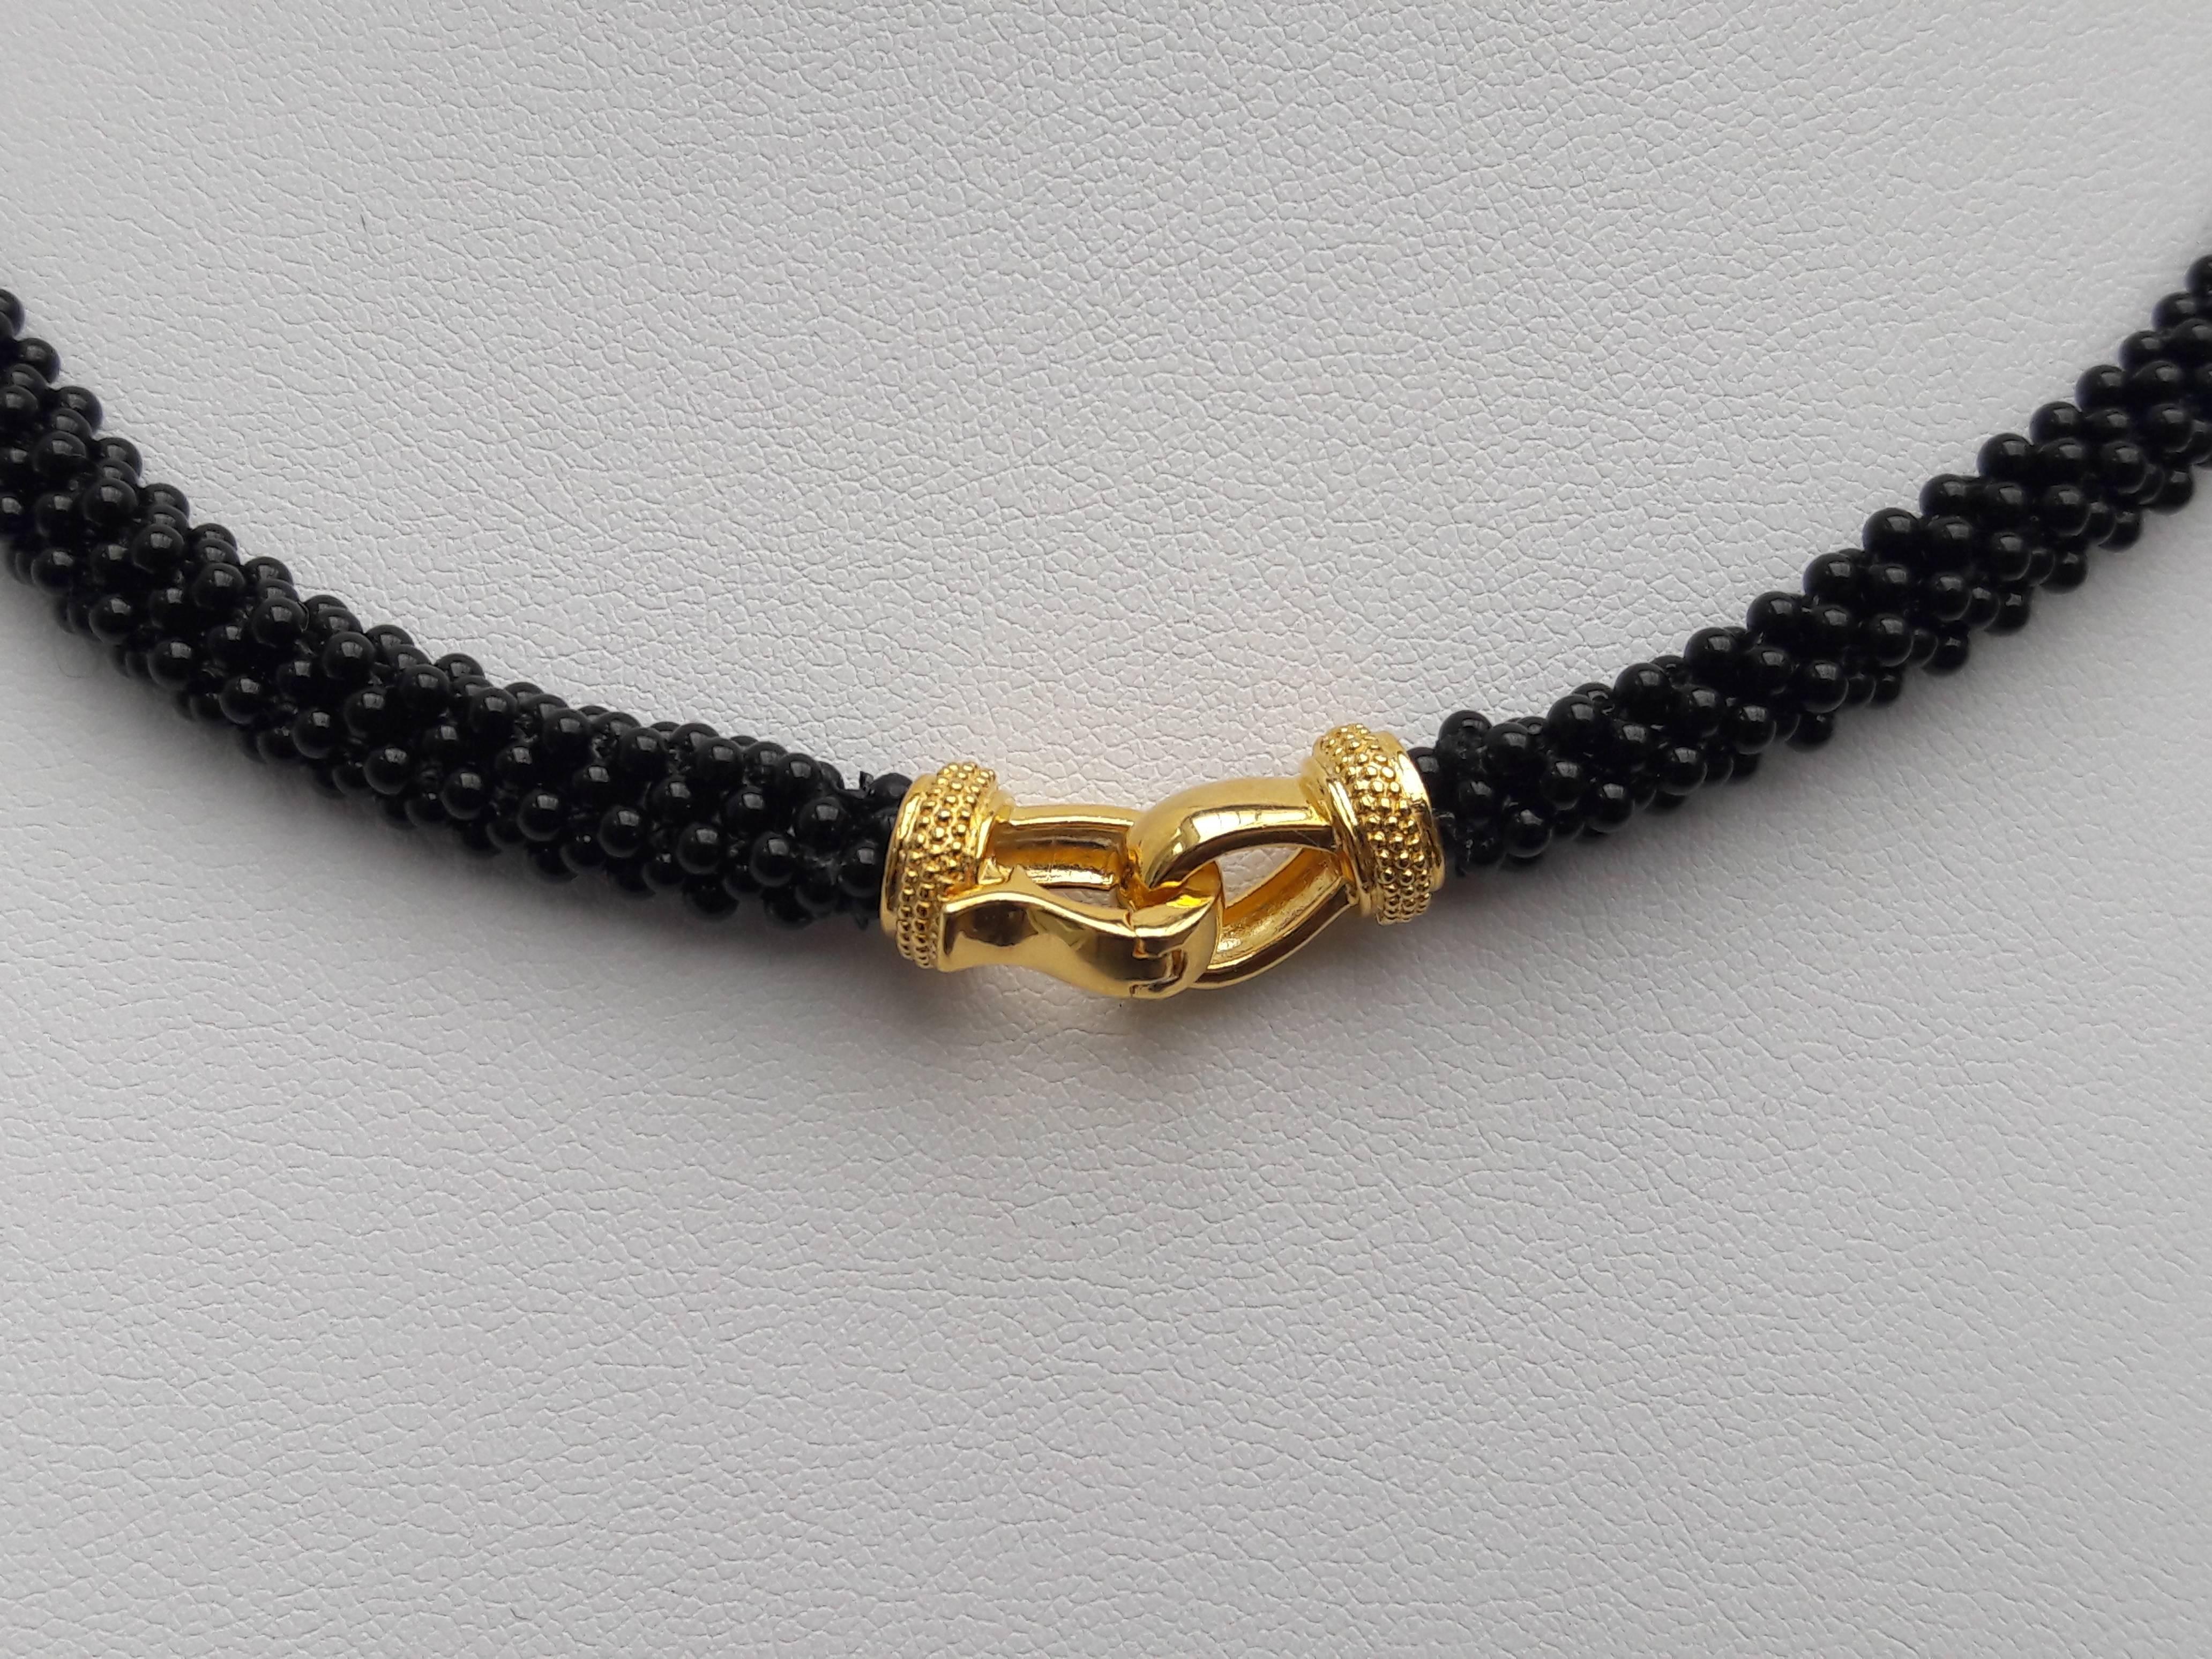 Women's or Men's Marina J. One-of-a-Kind Woven Black Onyx 3D Rope Bead Necklace